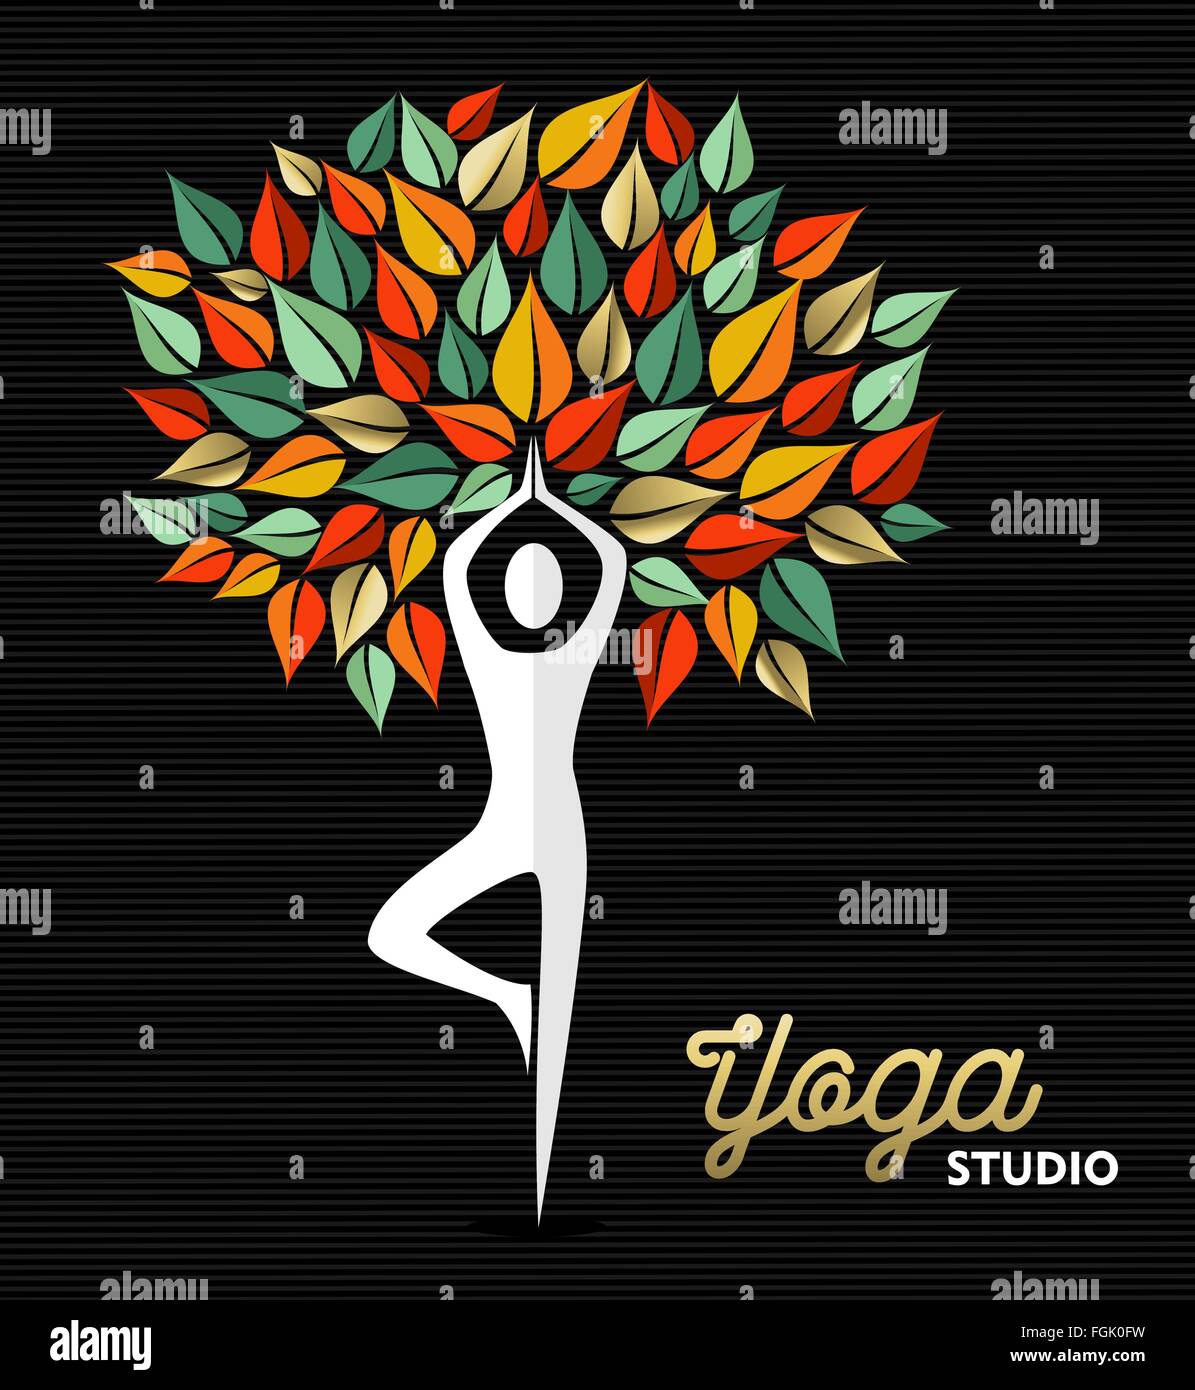 Yoga studio business template, geometric silhouette with colorful nature leaf design. EPS10 vector. Stock Vector